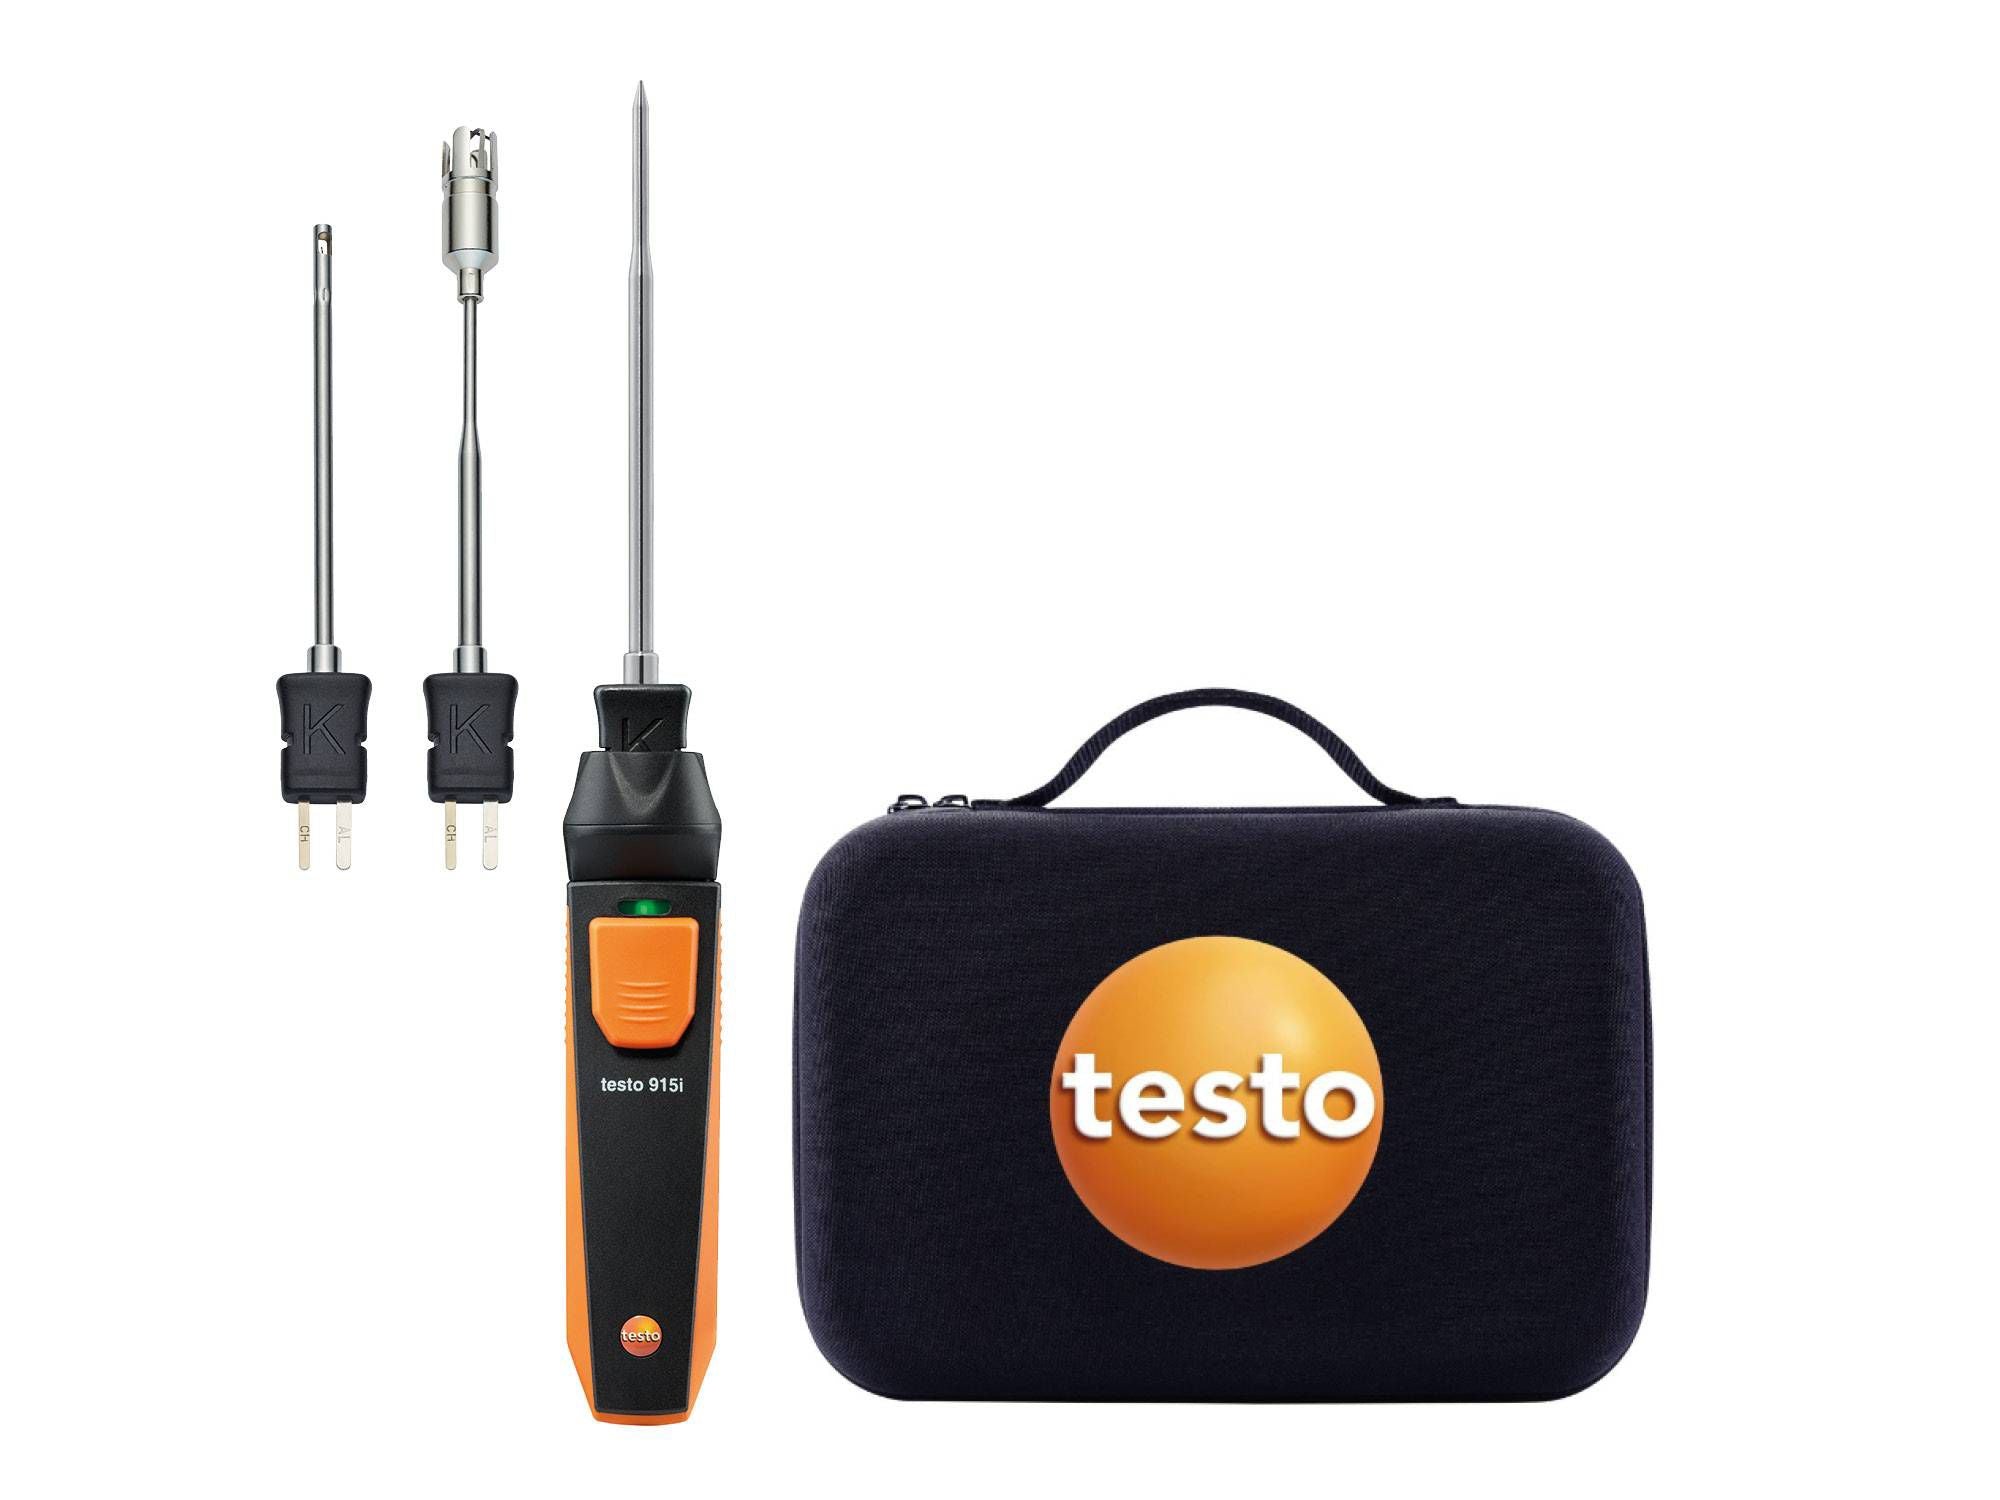 Testo 915i Temperature Kit - Thermometer With Temperature Probes and Smart App full set